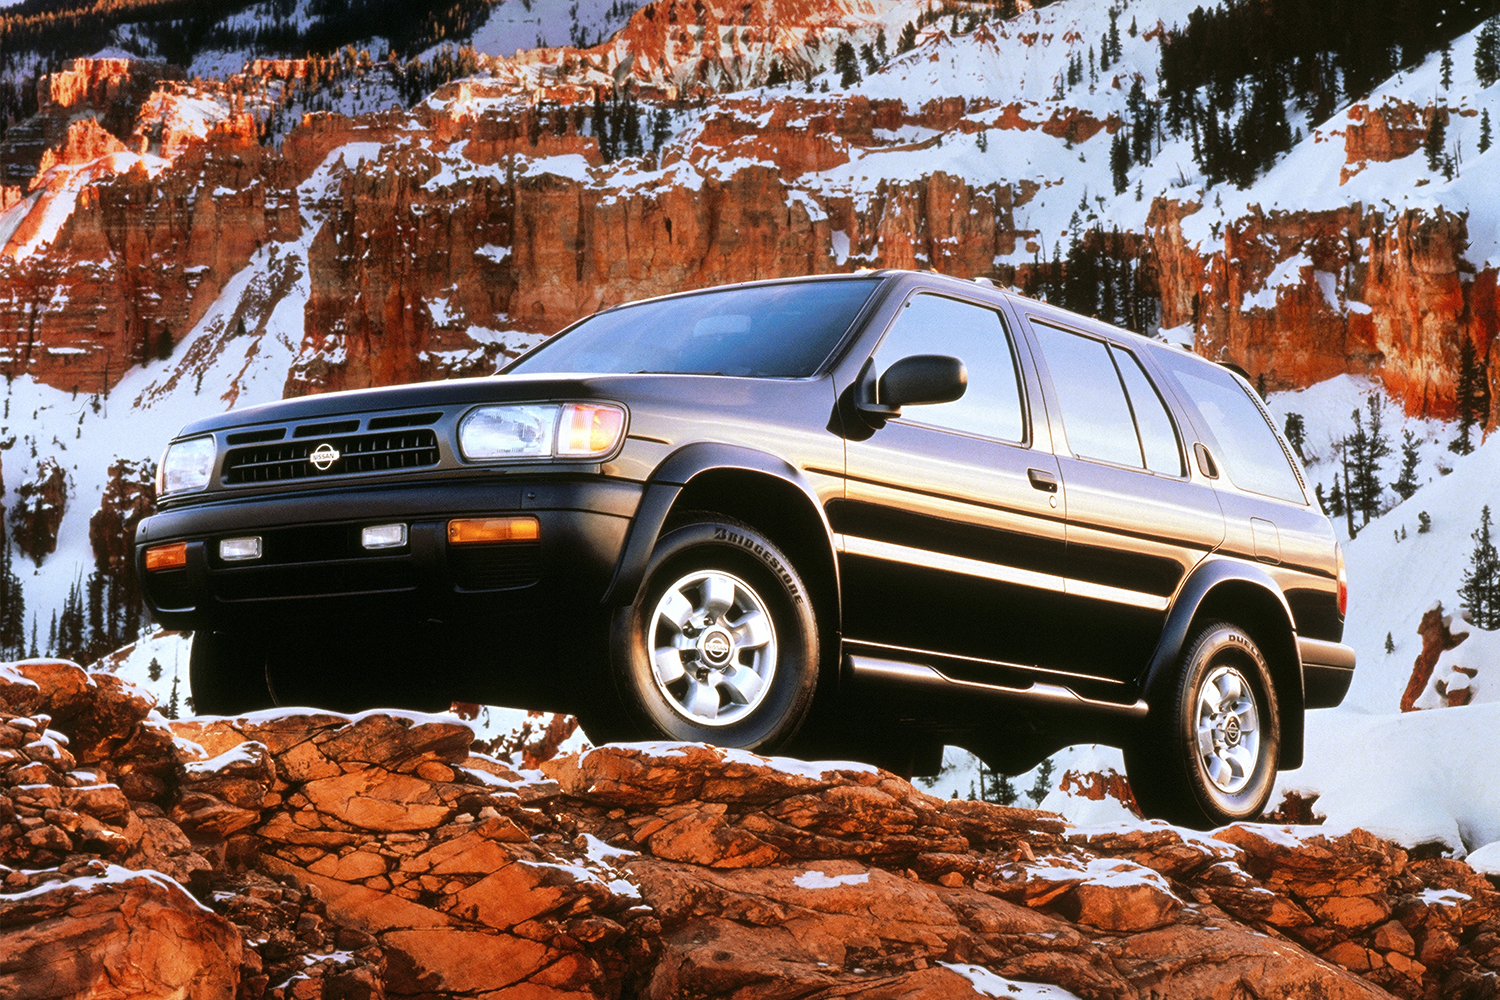 A 1997 Nissan Pathfinder SUV perched on a mountain with snow covered rock in the background in a vintage photo